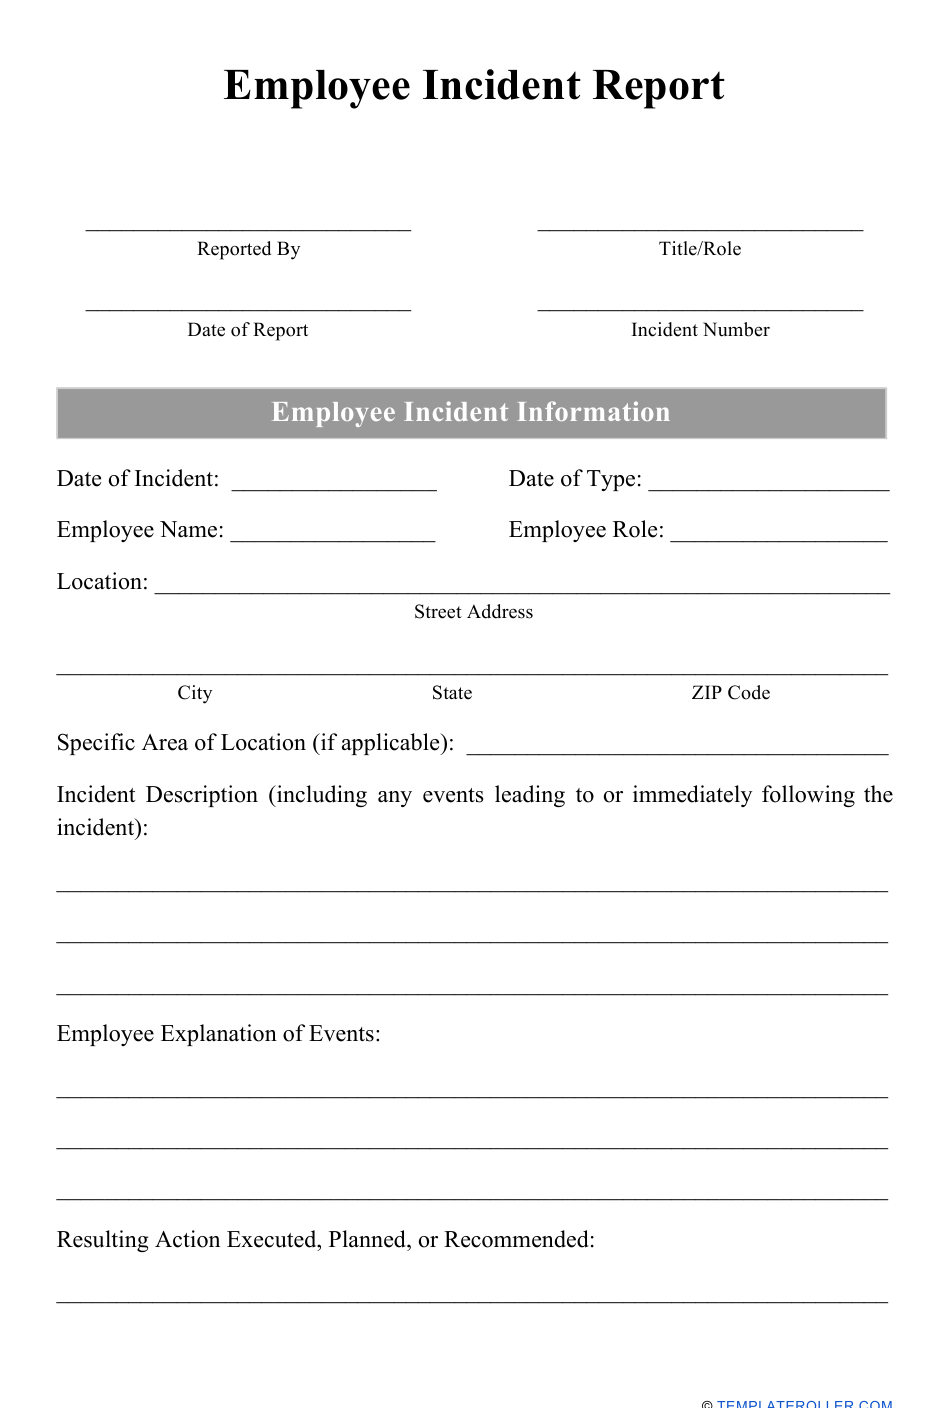 Employee Incident Report Form Download Printable PDF  Templateroller With Regard To Employee Incident Report Templates